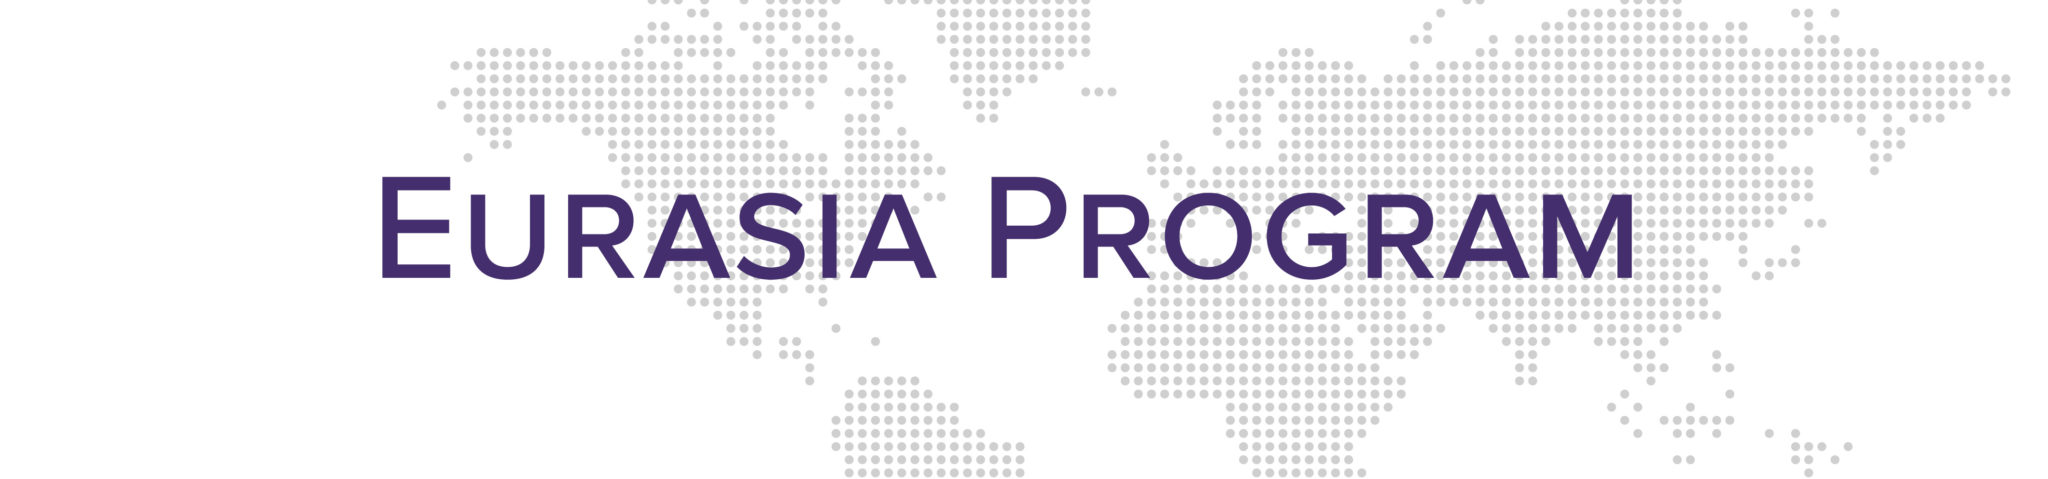 Eurasia 2020 Banner 01 Foreign Policy Research Institute